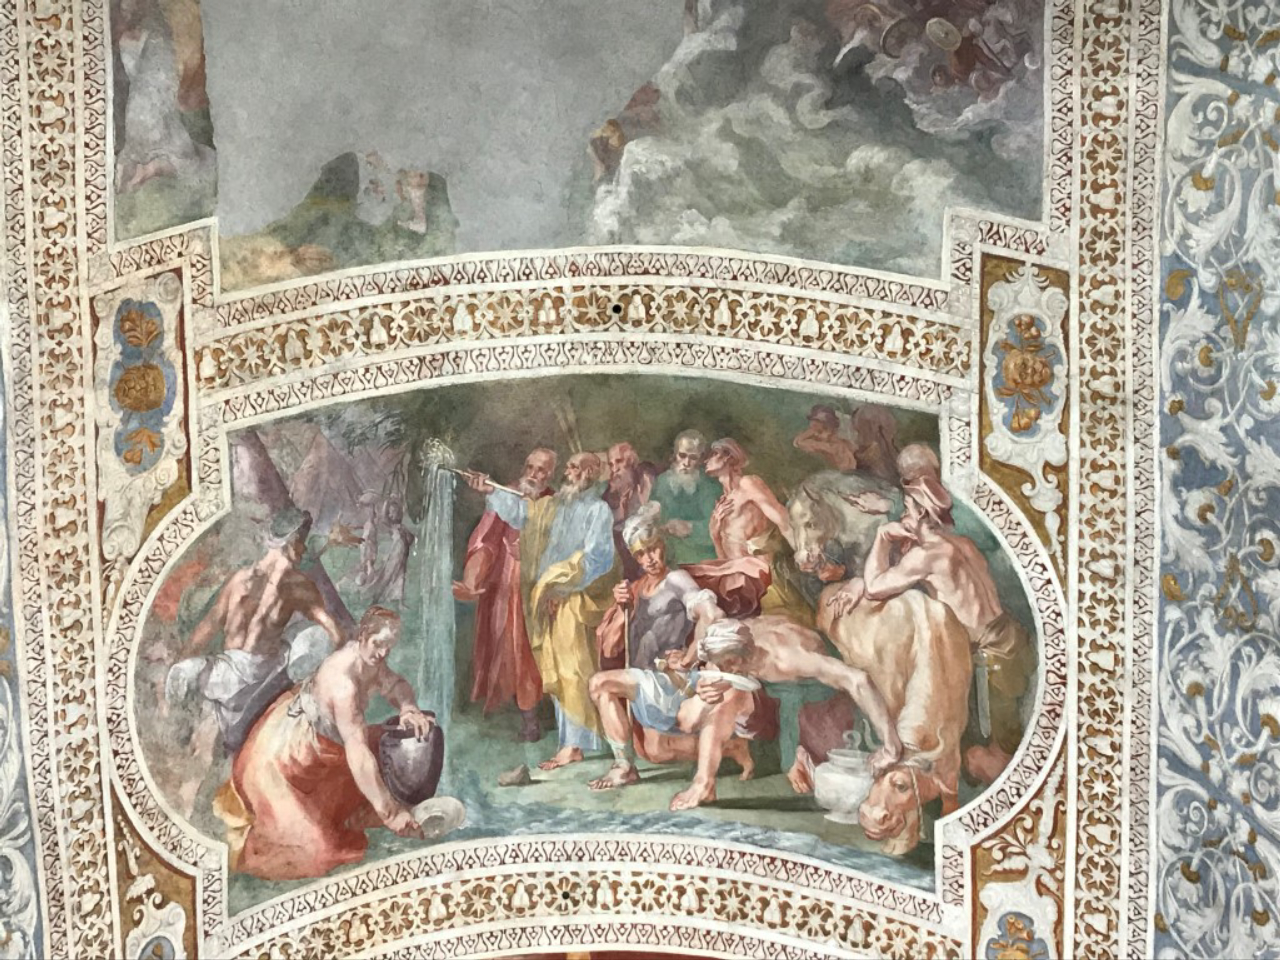 Frescoes above the marble staircase which Catholic tradition holds Jesus climbed at his judgment before the Roman prefect Pontius Pilate, in Rome, April 8, 2019. The steps, now in a sanctuary across from the Basilica of St. John Lateran, were purportedly brought to Rome in 326 A.D. (Elisabetta Povoledo/The New York Times)